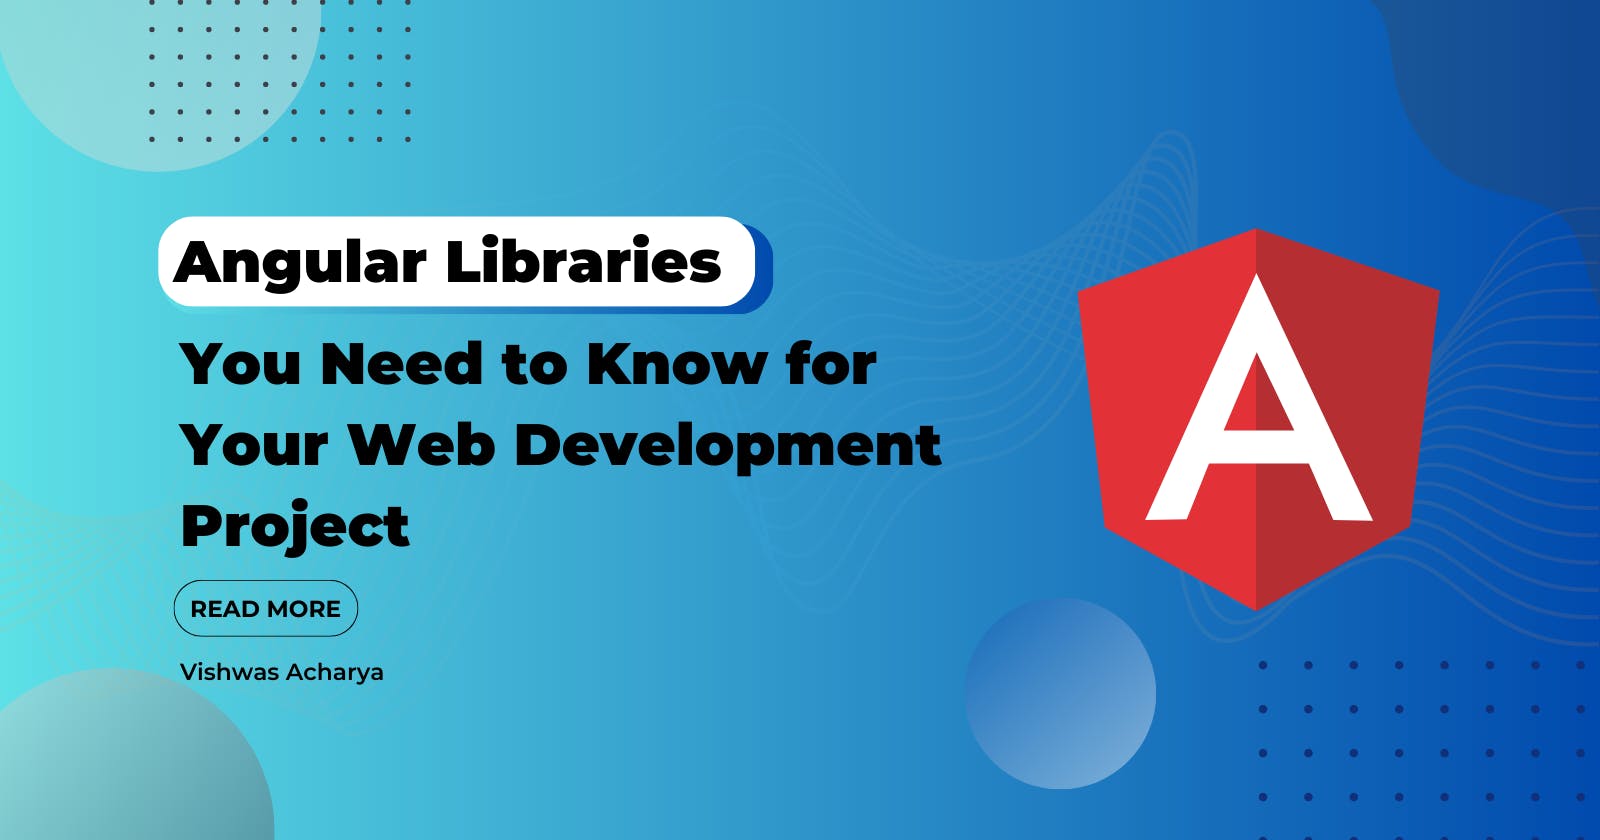 The Top Angular Libraries You Need to Know for Your Web Development Project